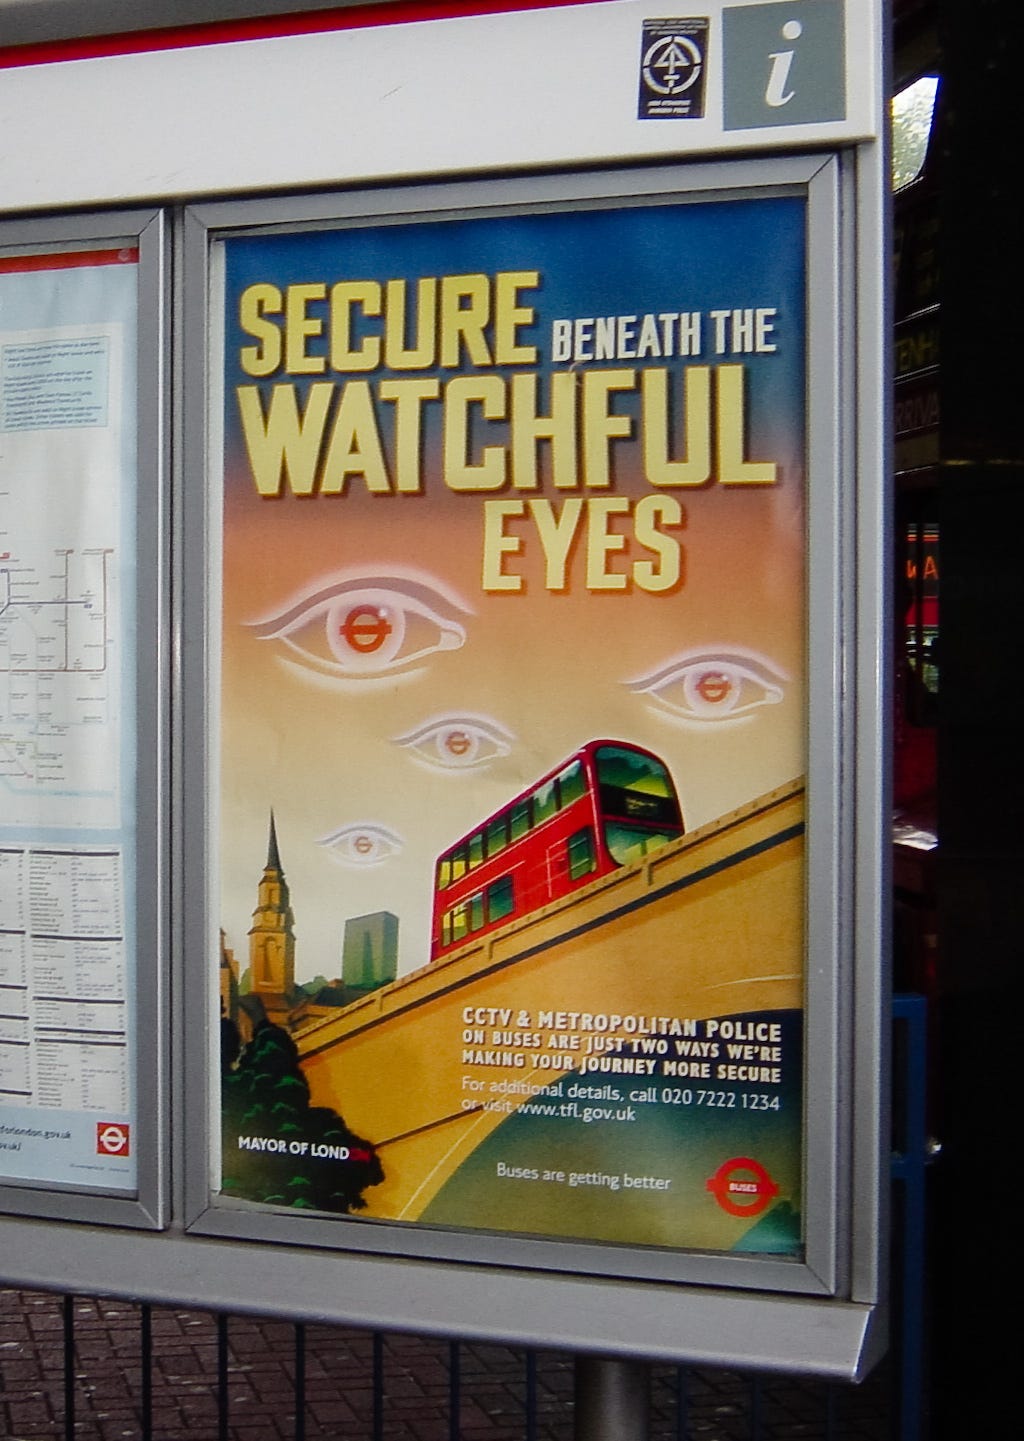 A poster in the London public transit system. The poster reassures bus riders that they are “secure beneath the watchful eyes.”